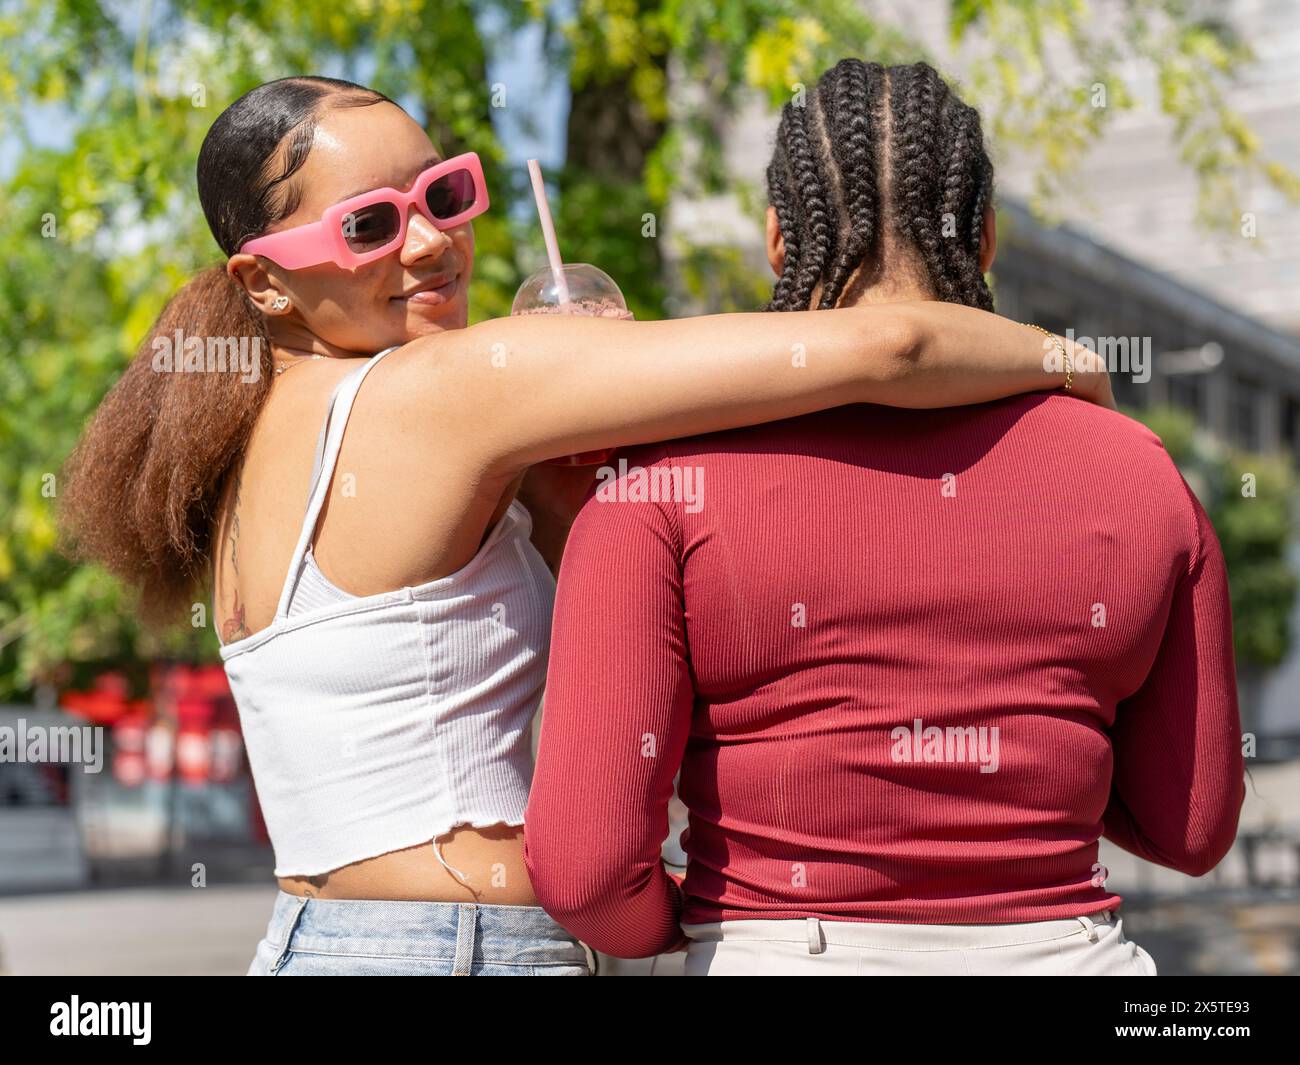 Portrait of smiling woman embracing friend on sunny day Stock Photo